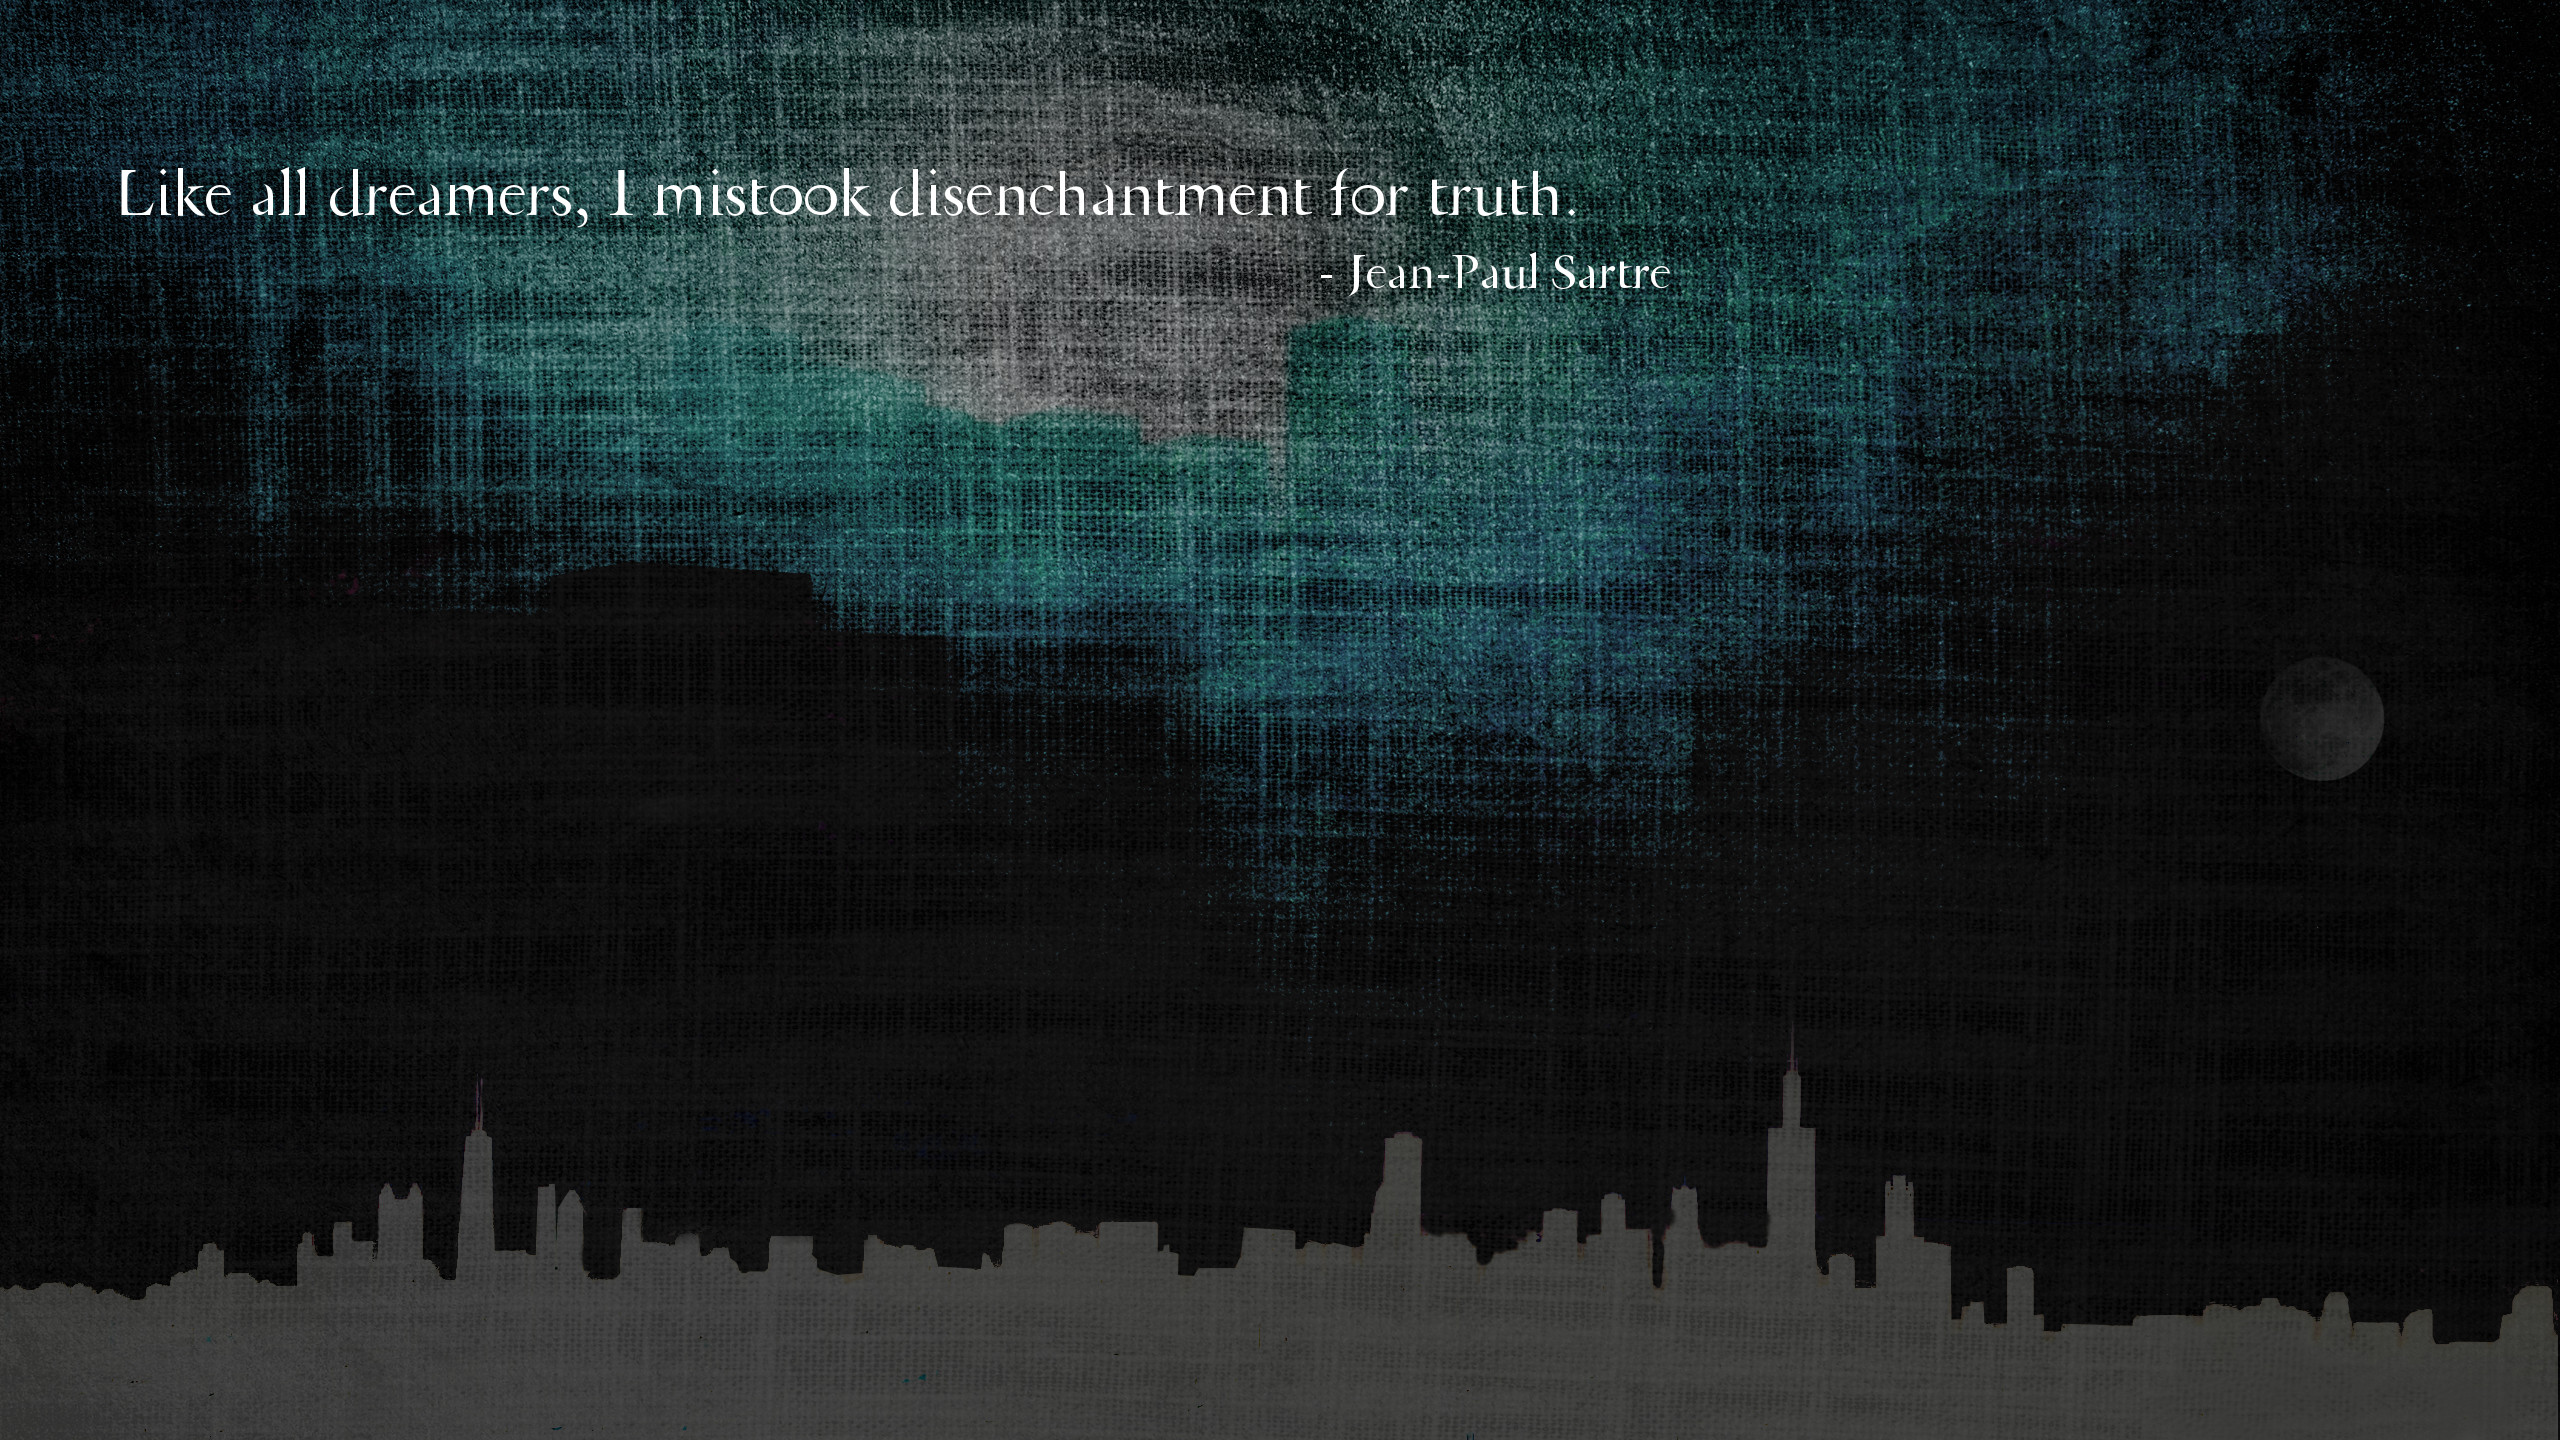 Existentialism Wallpaper Existentialism Quotes Like - Jean Paul Sartre Quotes - HD Wallpaper 